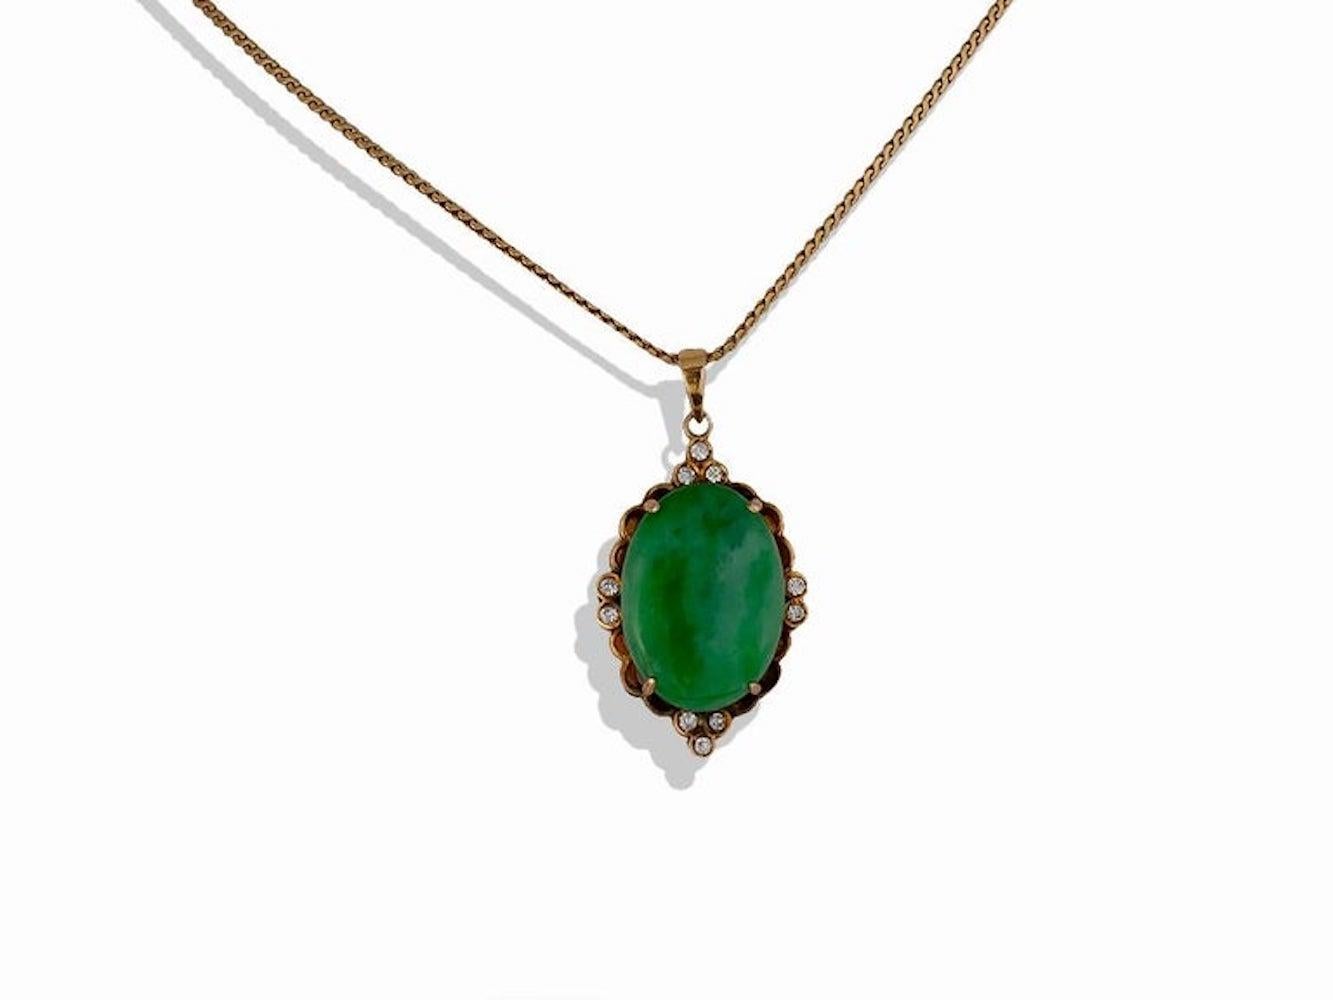 Asian jade and diamond pendant is made with a natural oval cabochon  jade measuring 19.5 x 13.5 x 4mm. 
The jade is set in an 18 karat yellow gold setting and has 10 round brilliant diamonds accenting the jewel-green colored center piece. 
The